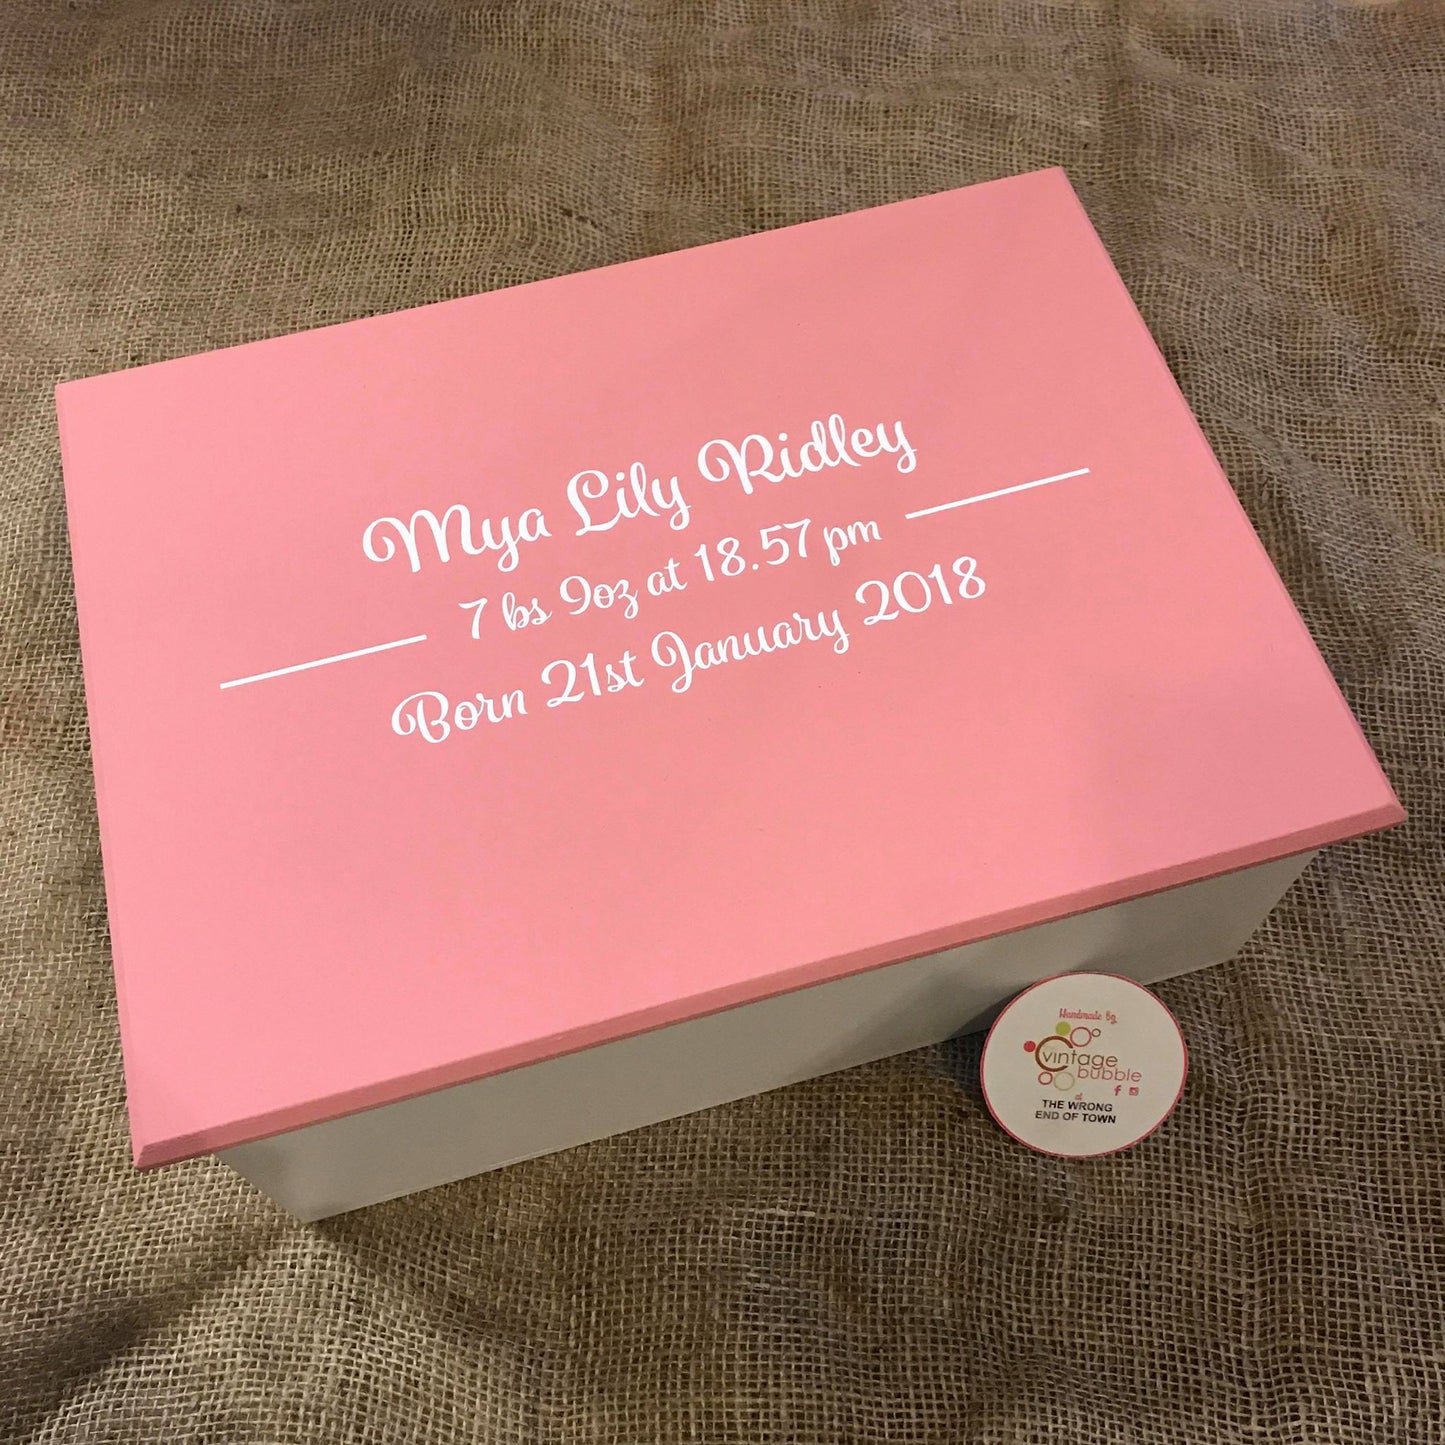 Personalised Memory Keepsake Boxes from The Wrong End of Town